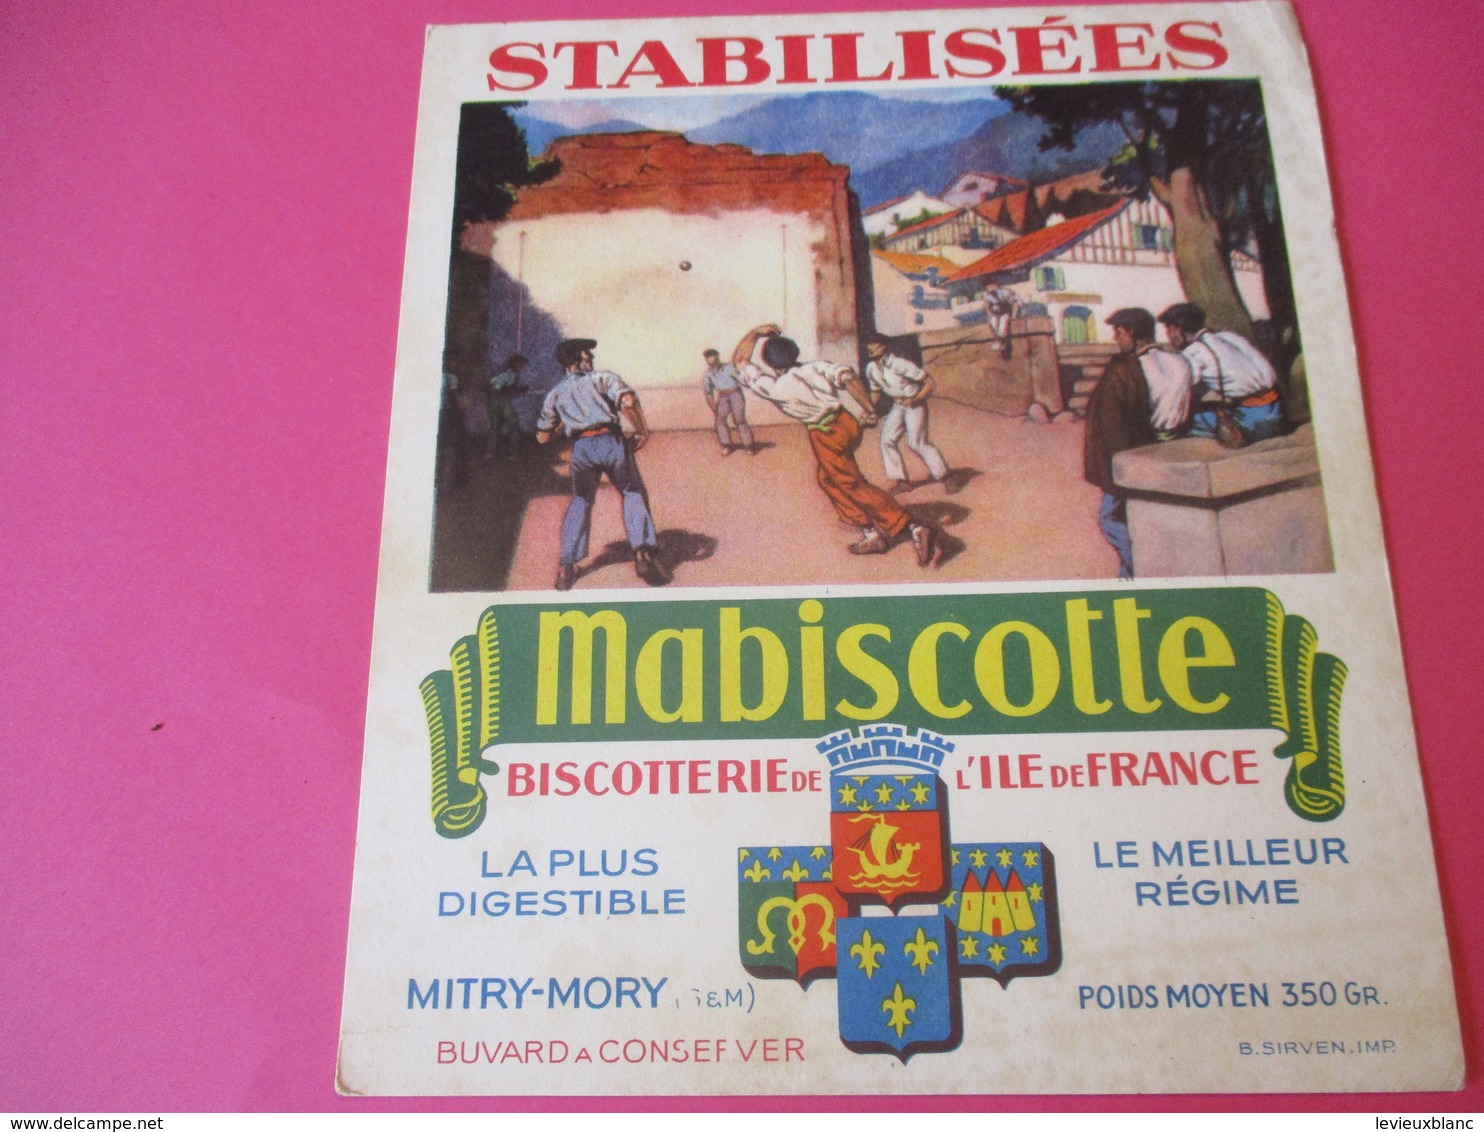 Buvard//Stabilisées/MABISCOTTE/Pelote Basque /Biscotterie Ile De France/MITRY-MORY (S&M)/Sirven/Vers 1940-1960  BUV435 - Biscottes